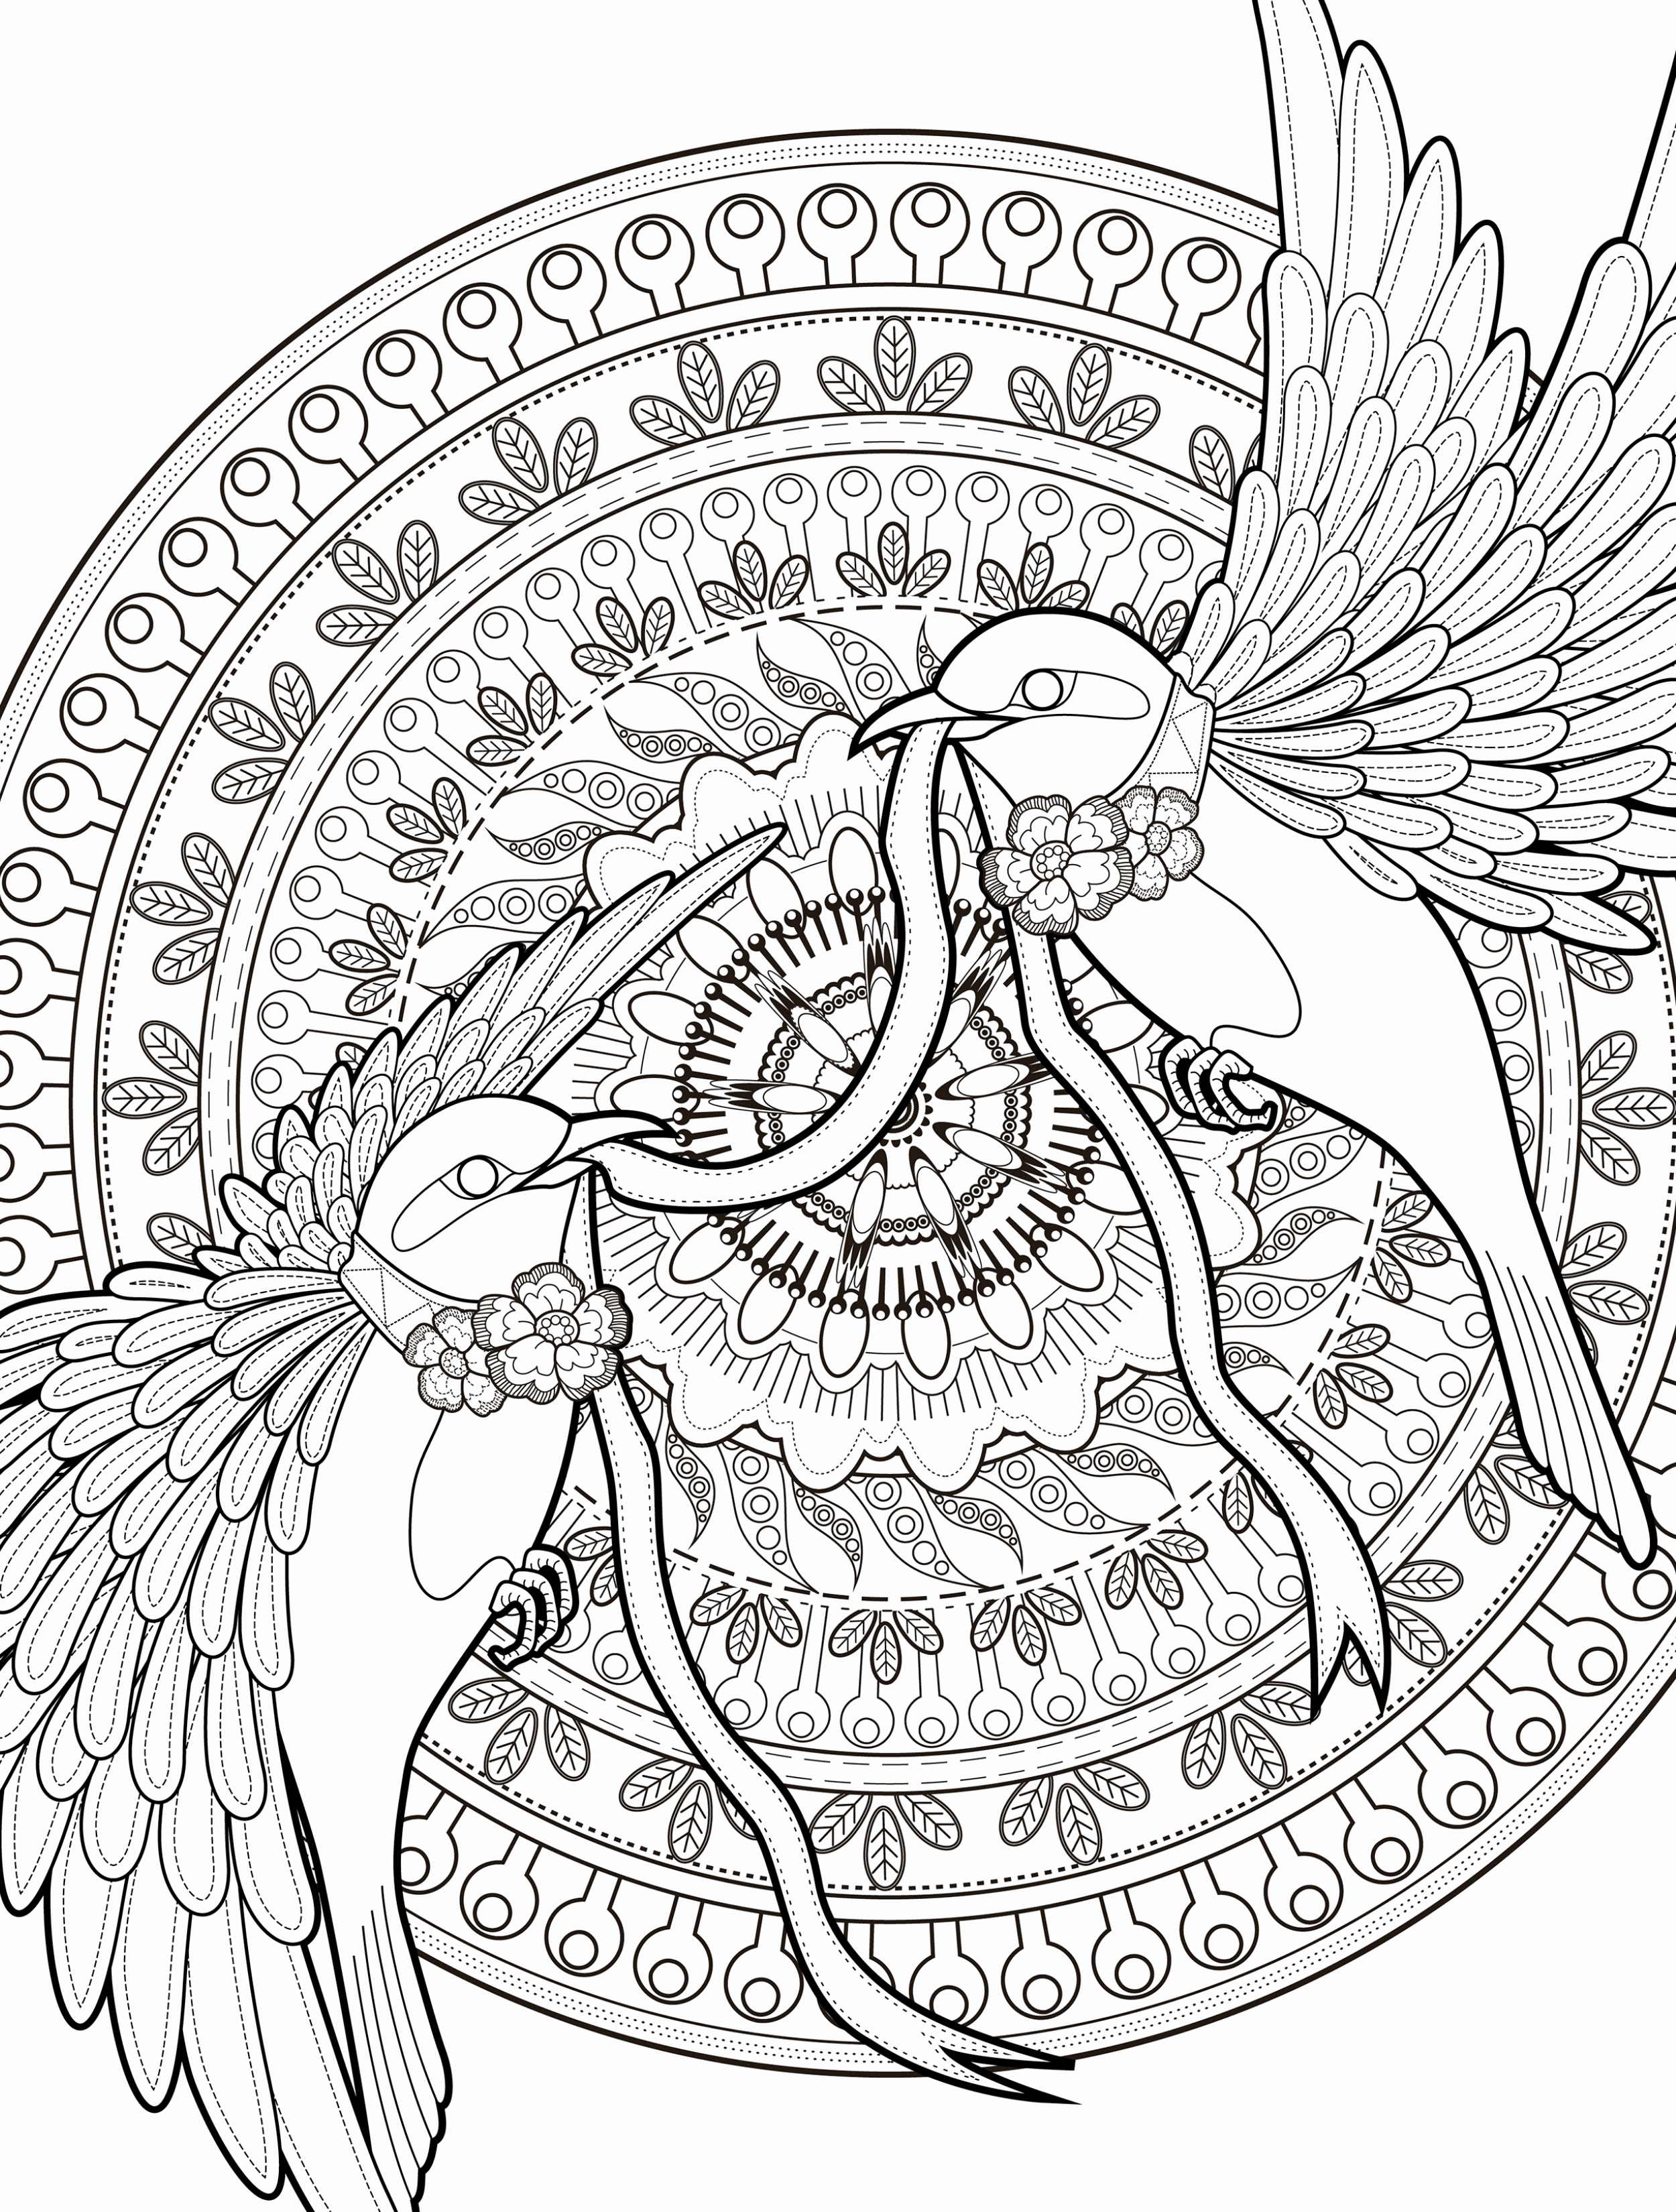 Free Adult Coloring Pages Pdf At GetColorings Free Printable Colorings Pages To Print And